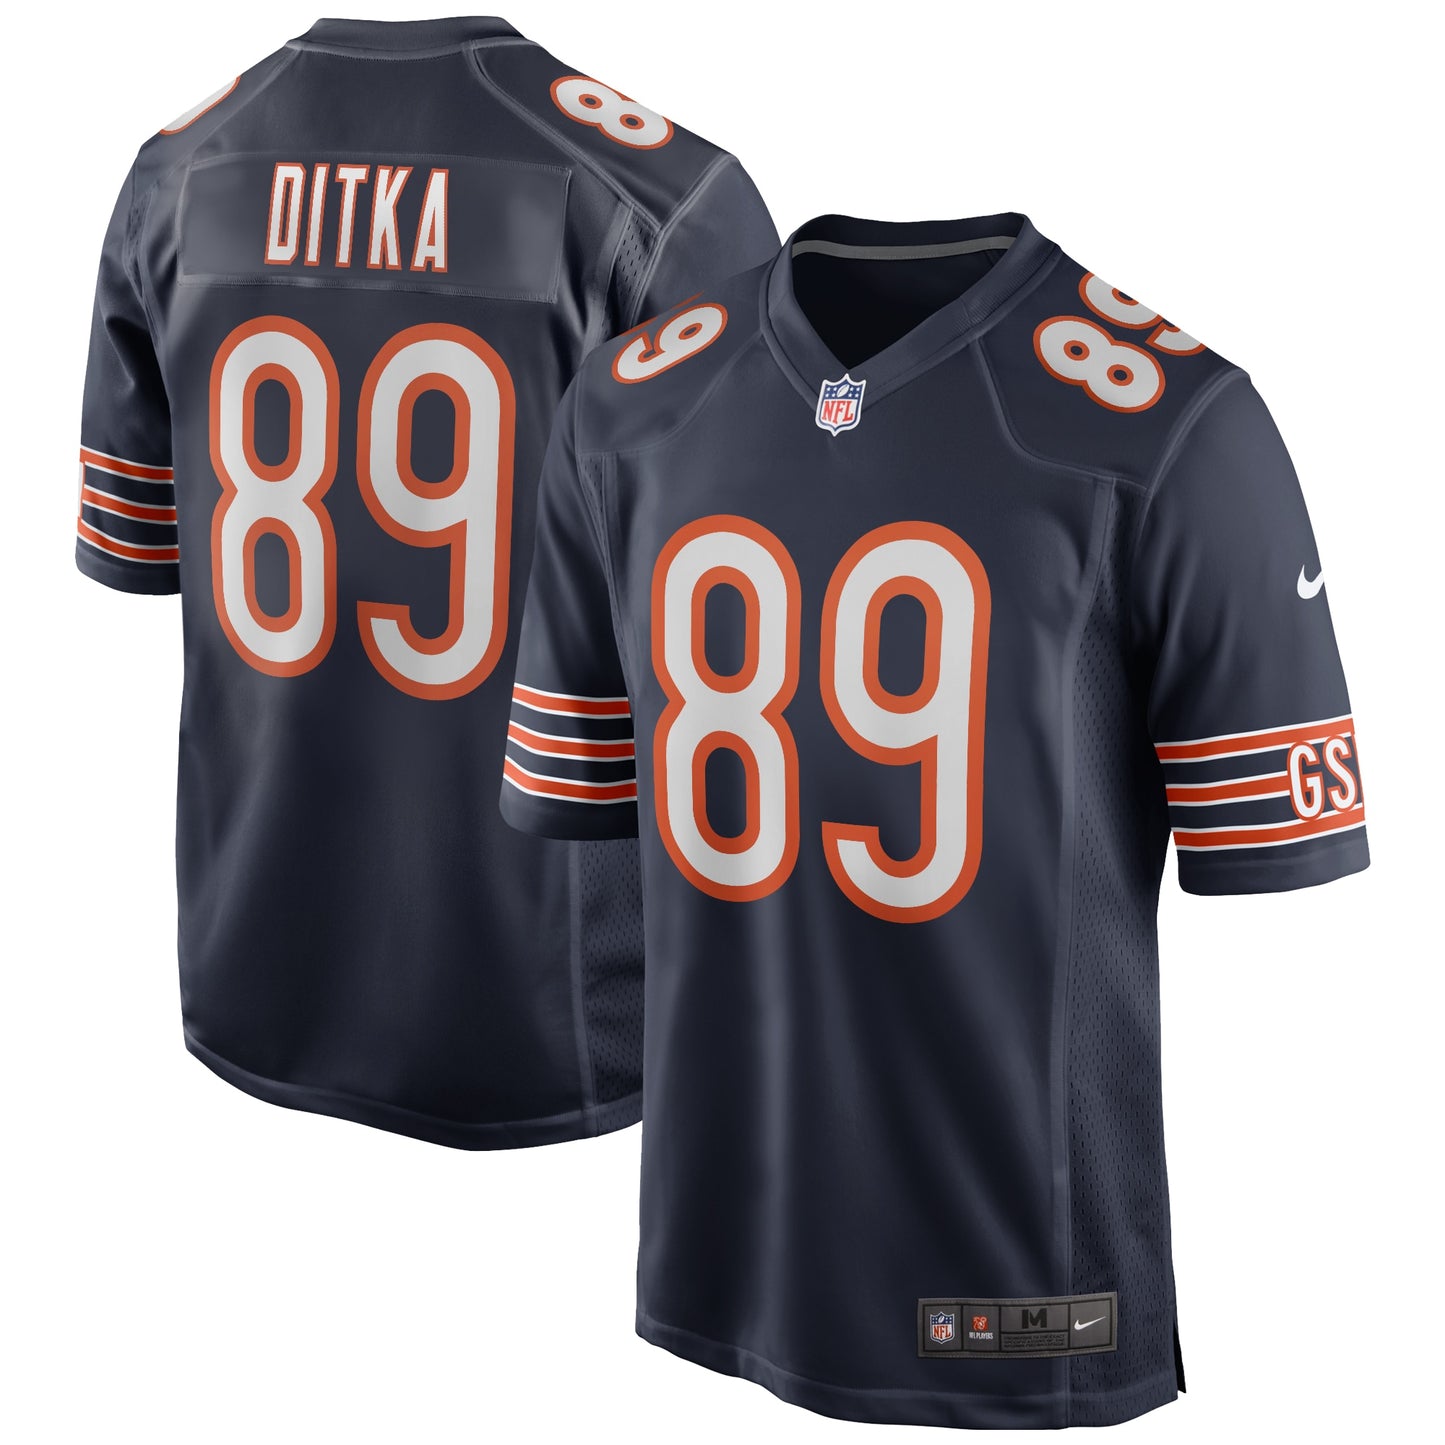 Mike Ditka Chicago Bears Nike Game Retired Player Jersey - Navy